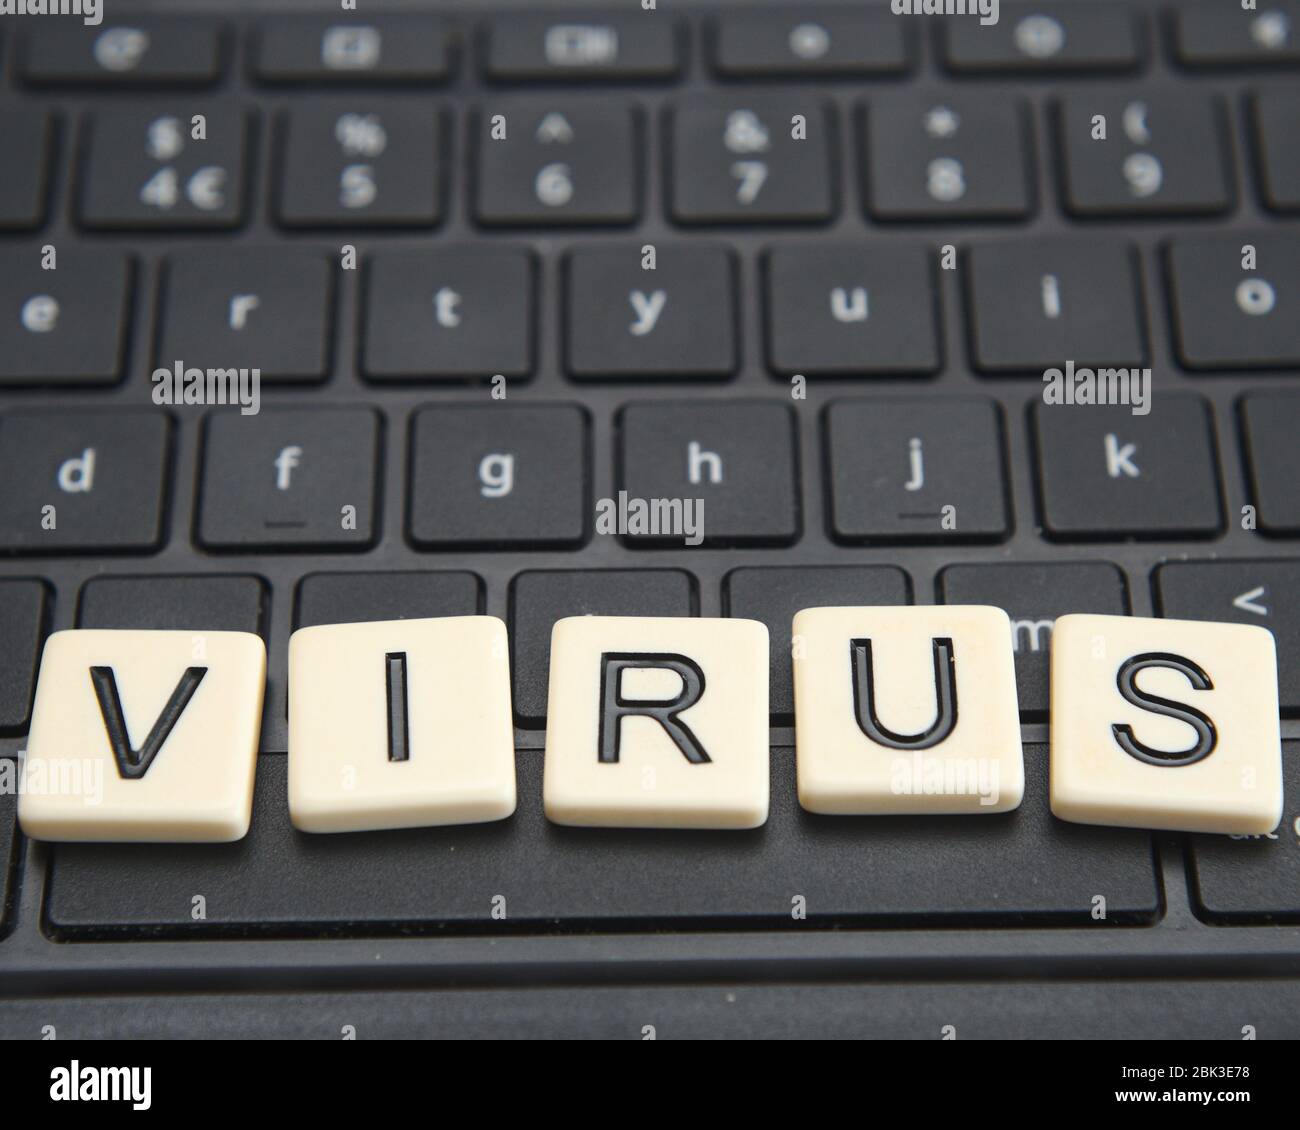 Computer virus infection risk concept image Stock Photo